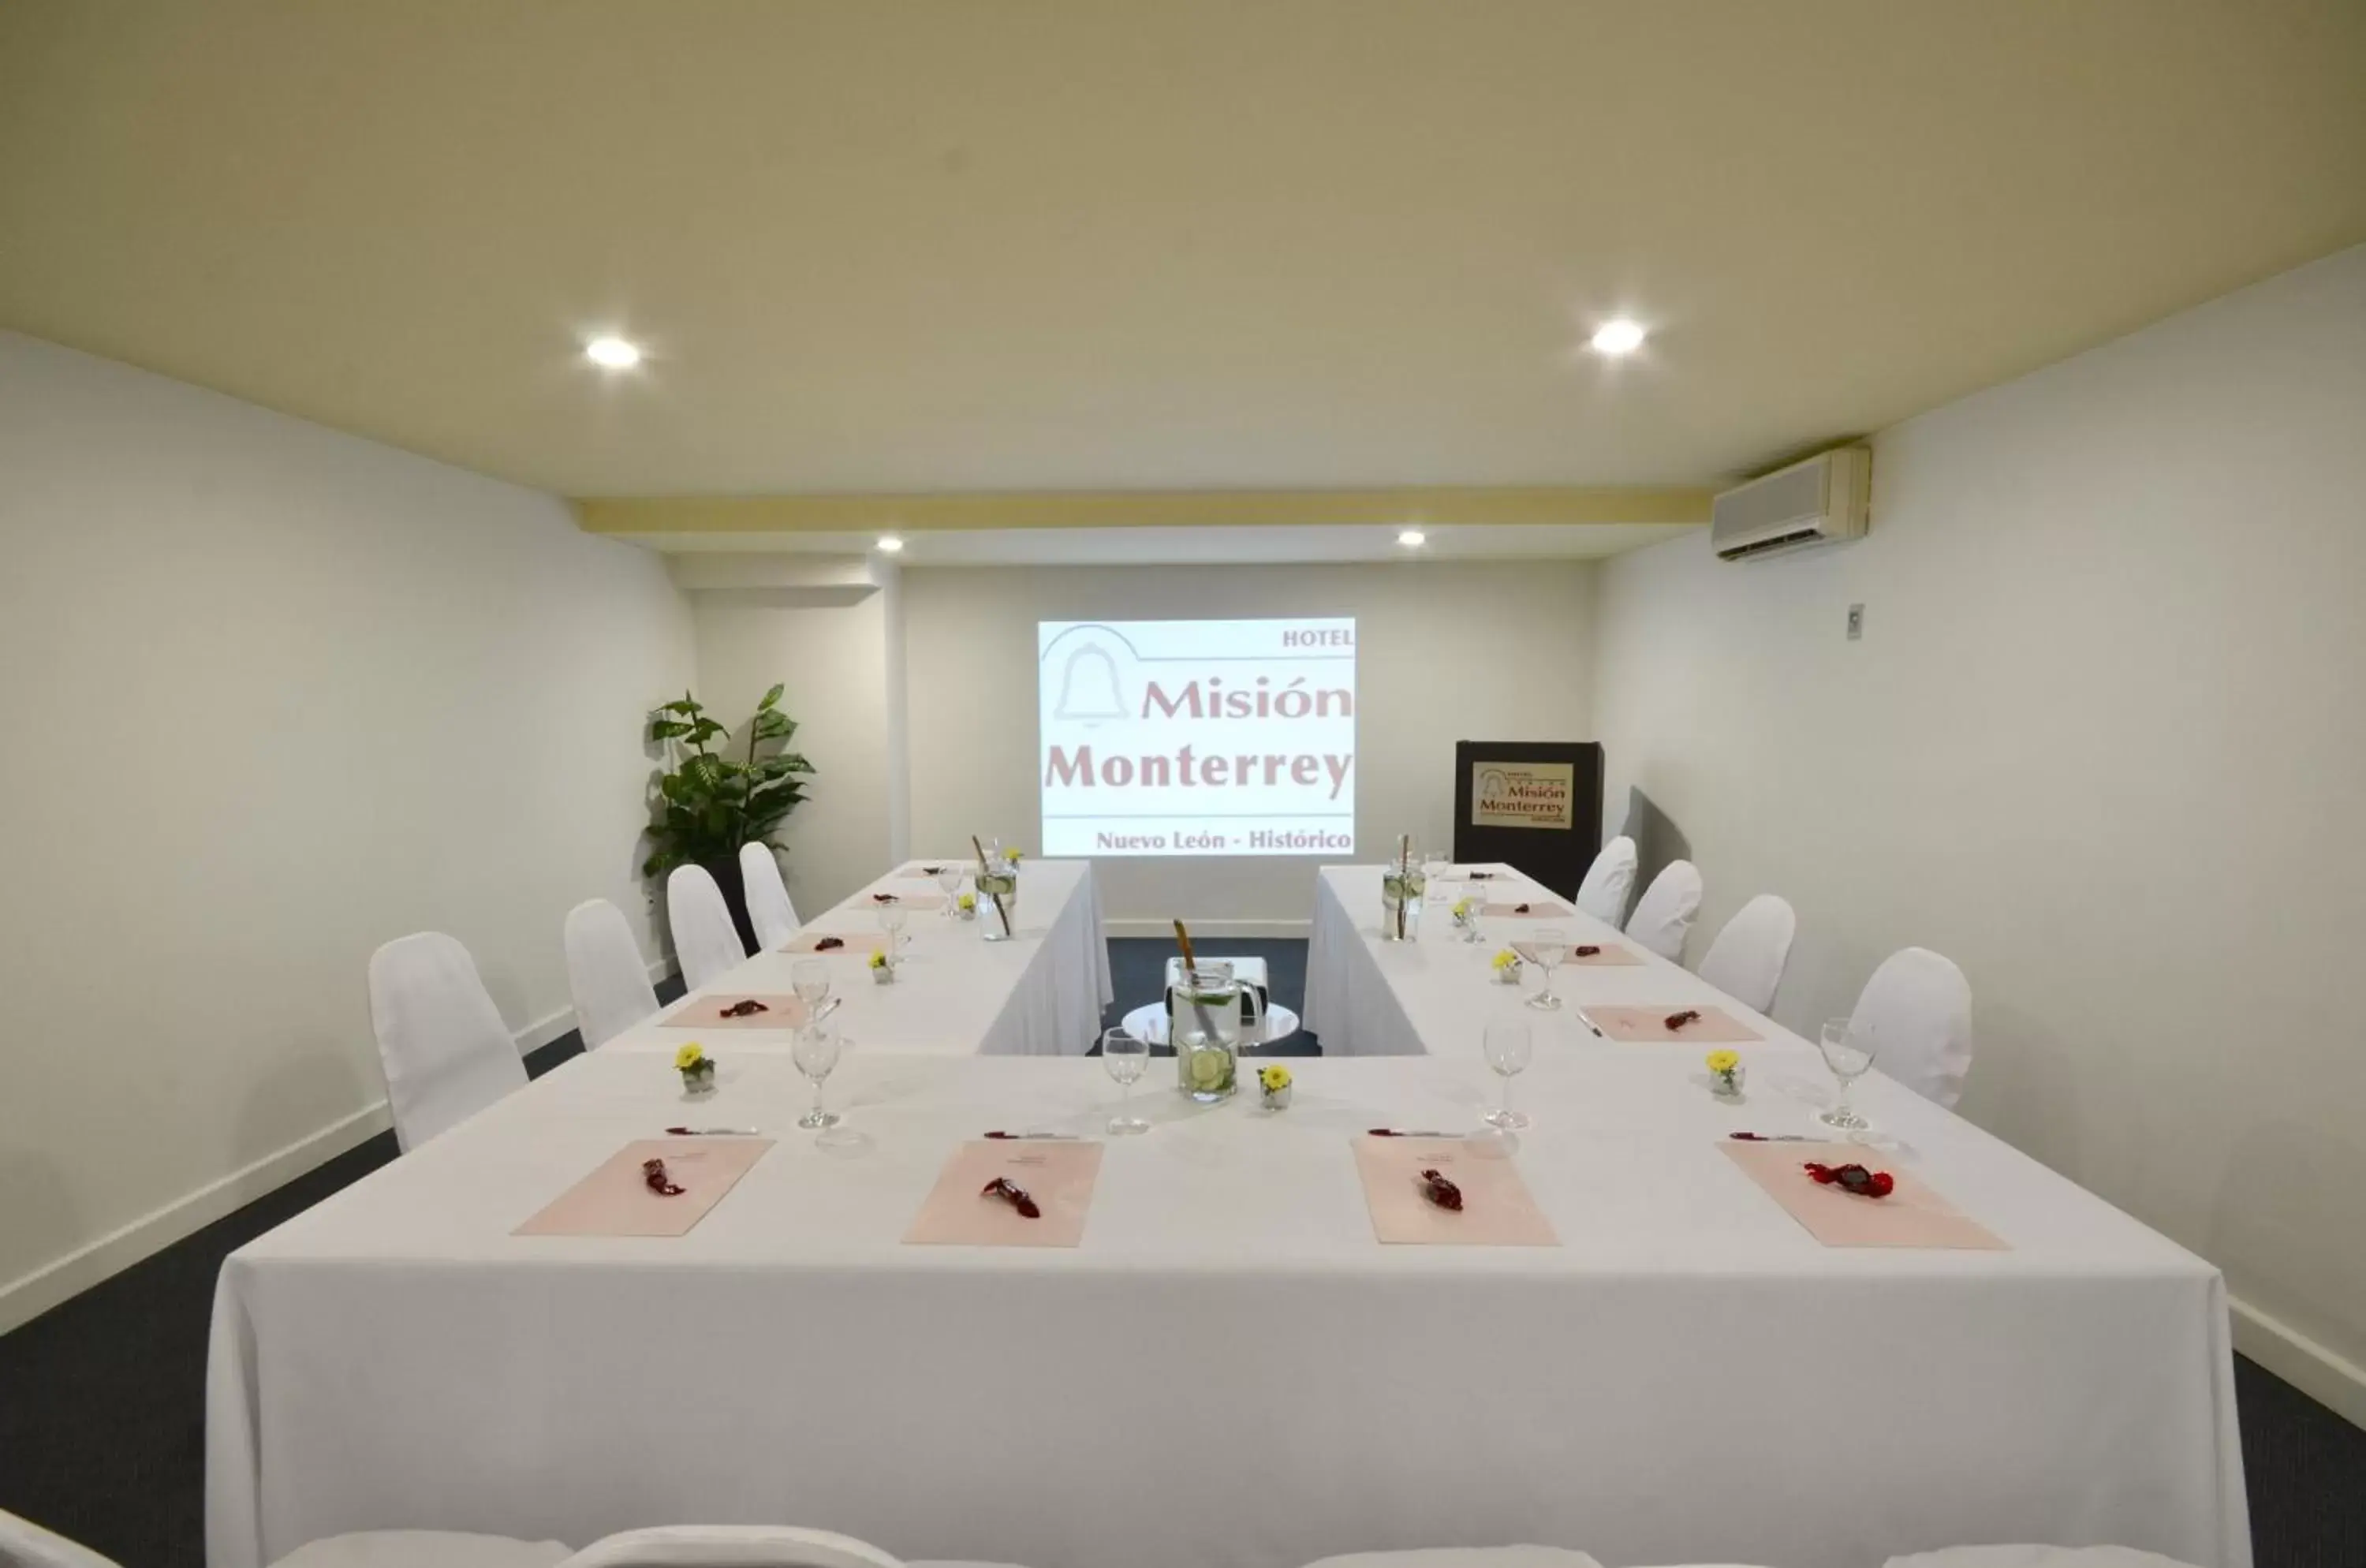 Meeting/conference room in Mision Monterrey Centro Historico